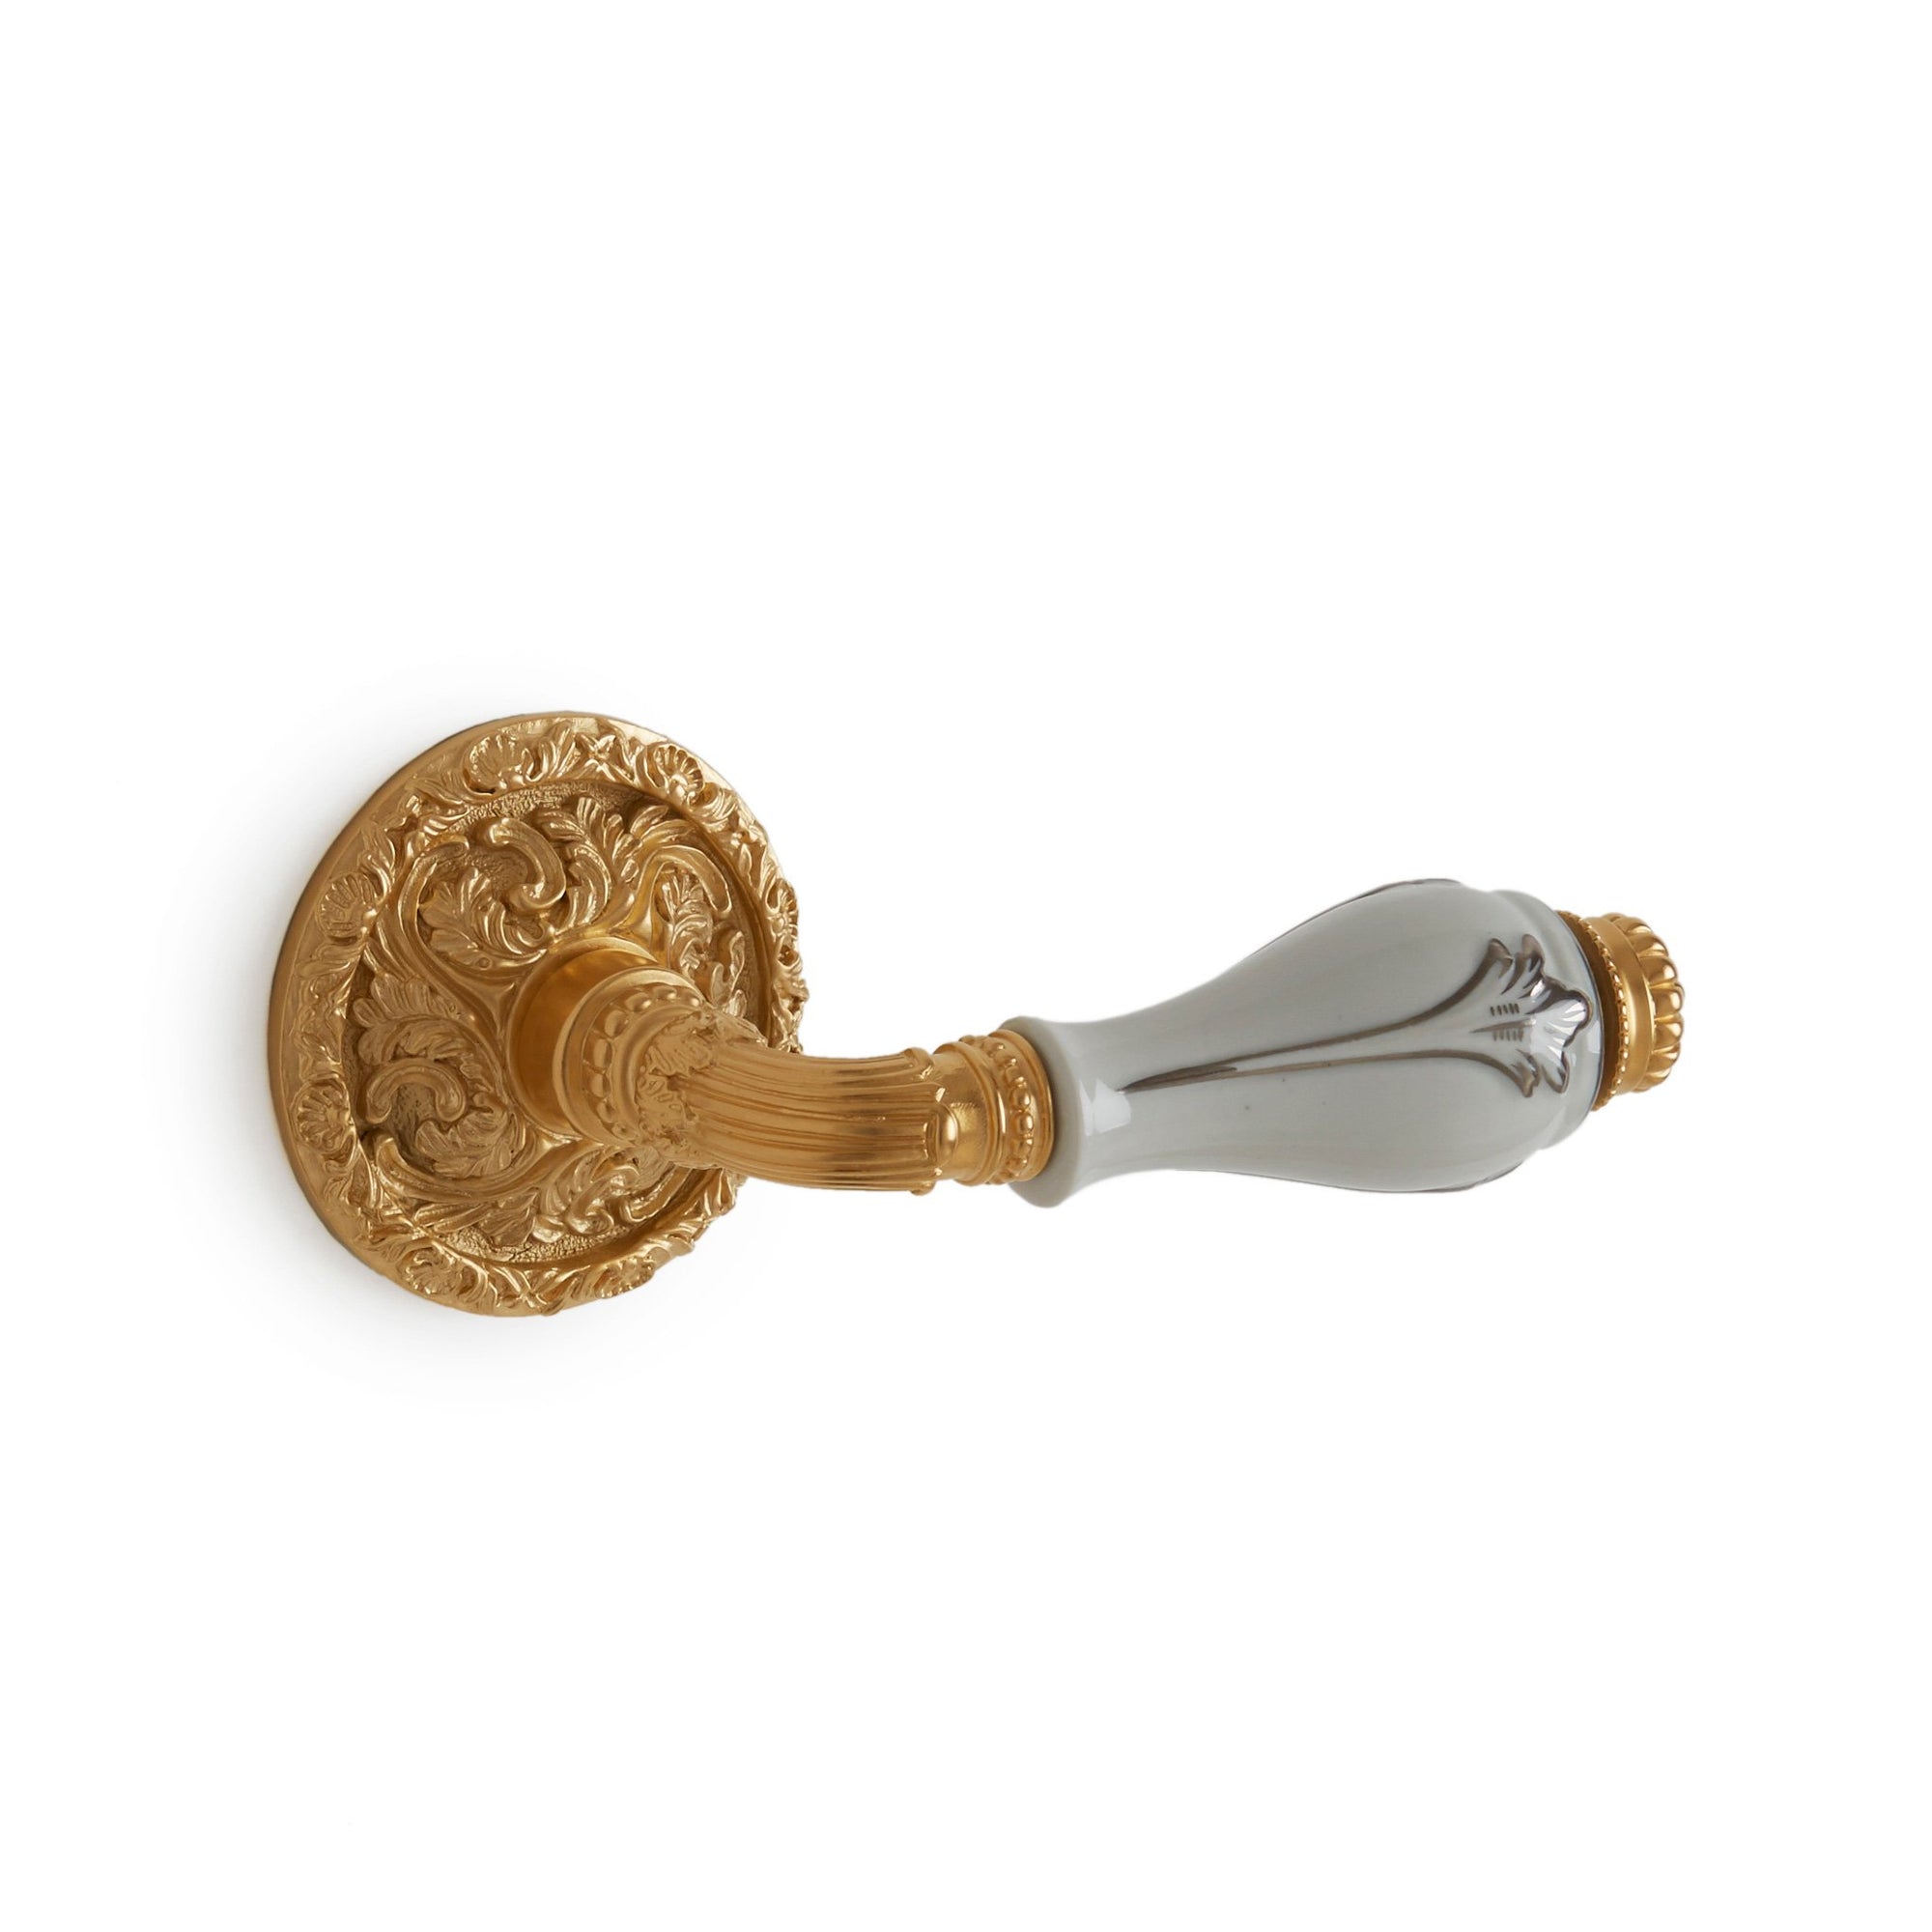 1029DOR-RH-24PL-WH-GP Sherle Wagner International Provence Ceramic Fluted Door Lever in Gold Plate metal finish with Platinum Accents on White Glaze inserts